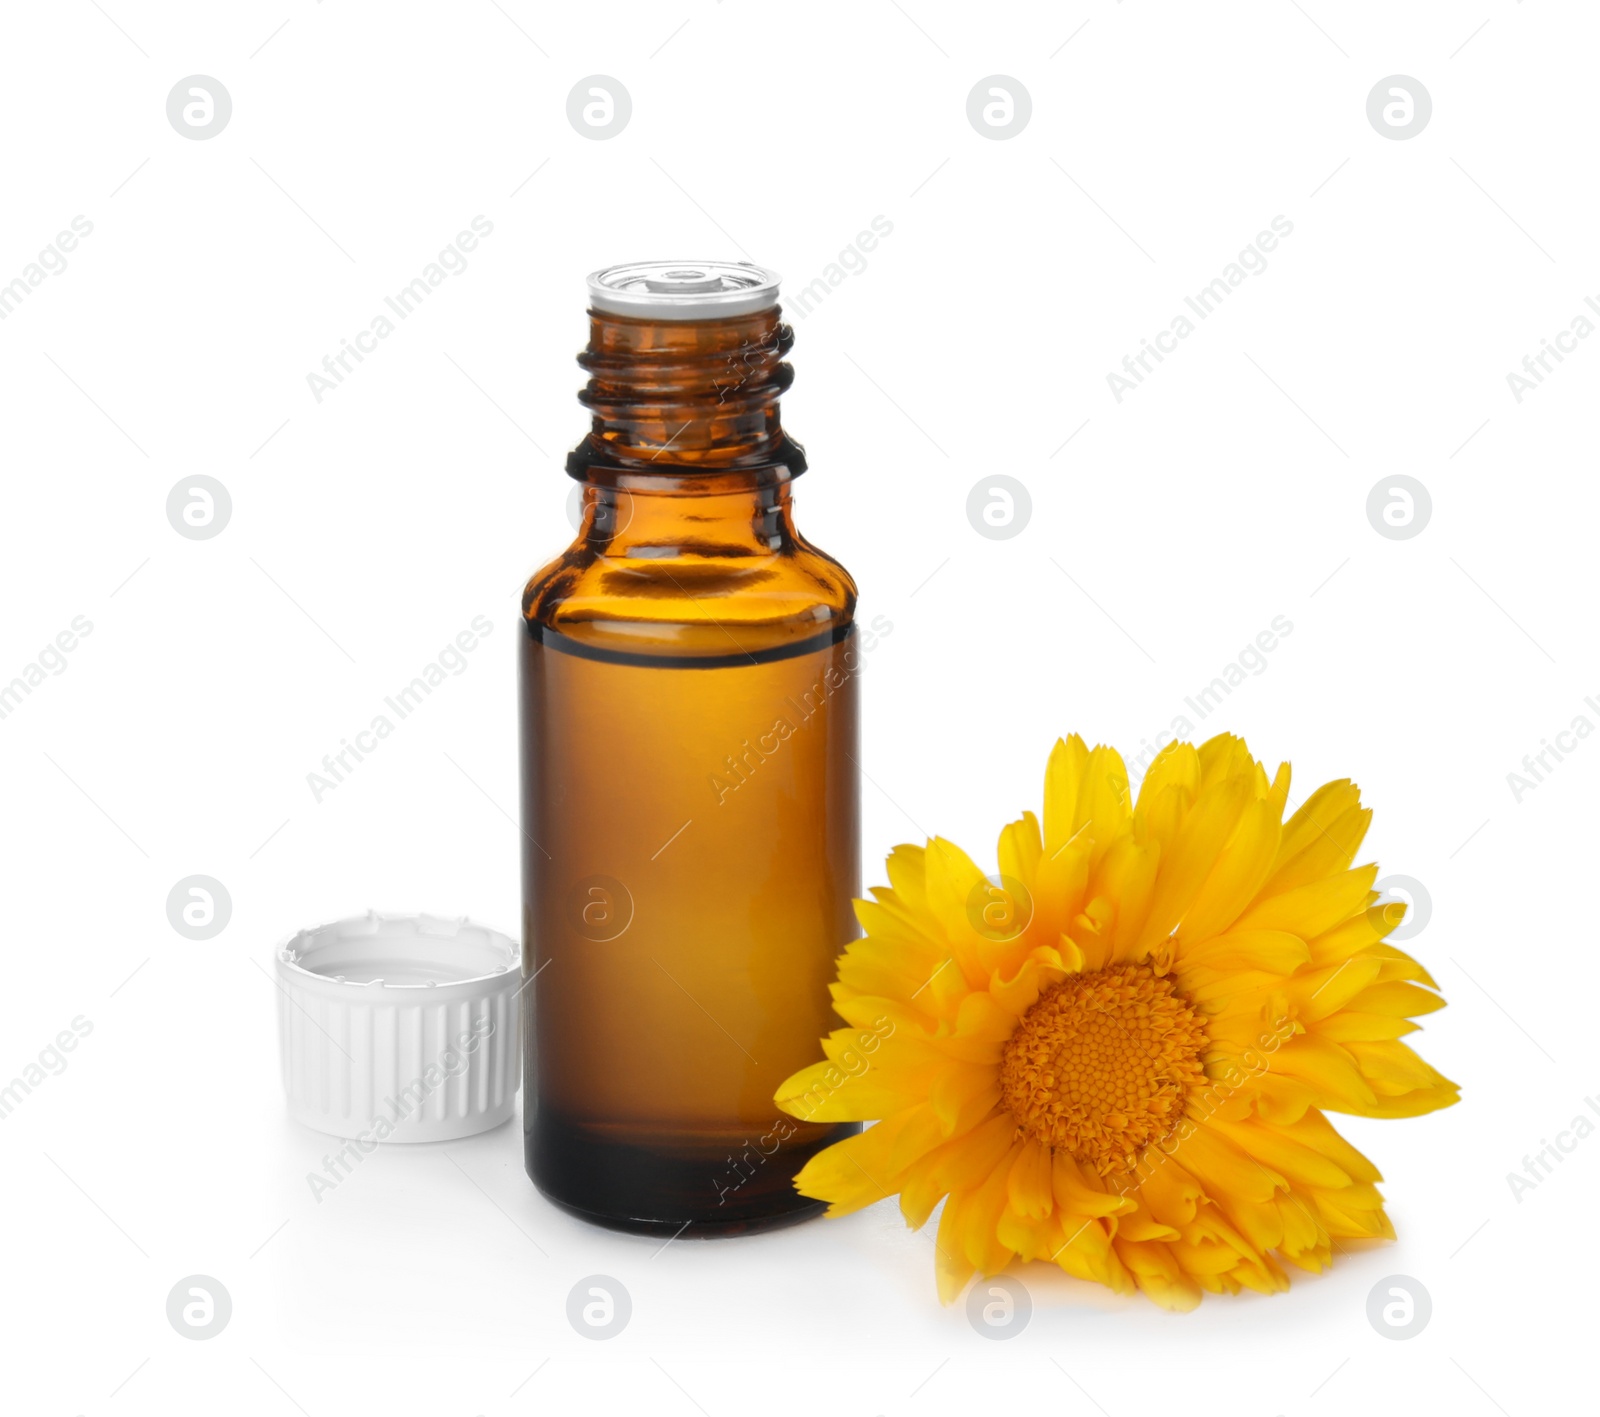 Photo of Bottle of essential oil and flower on white background